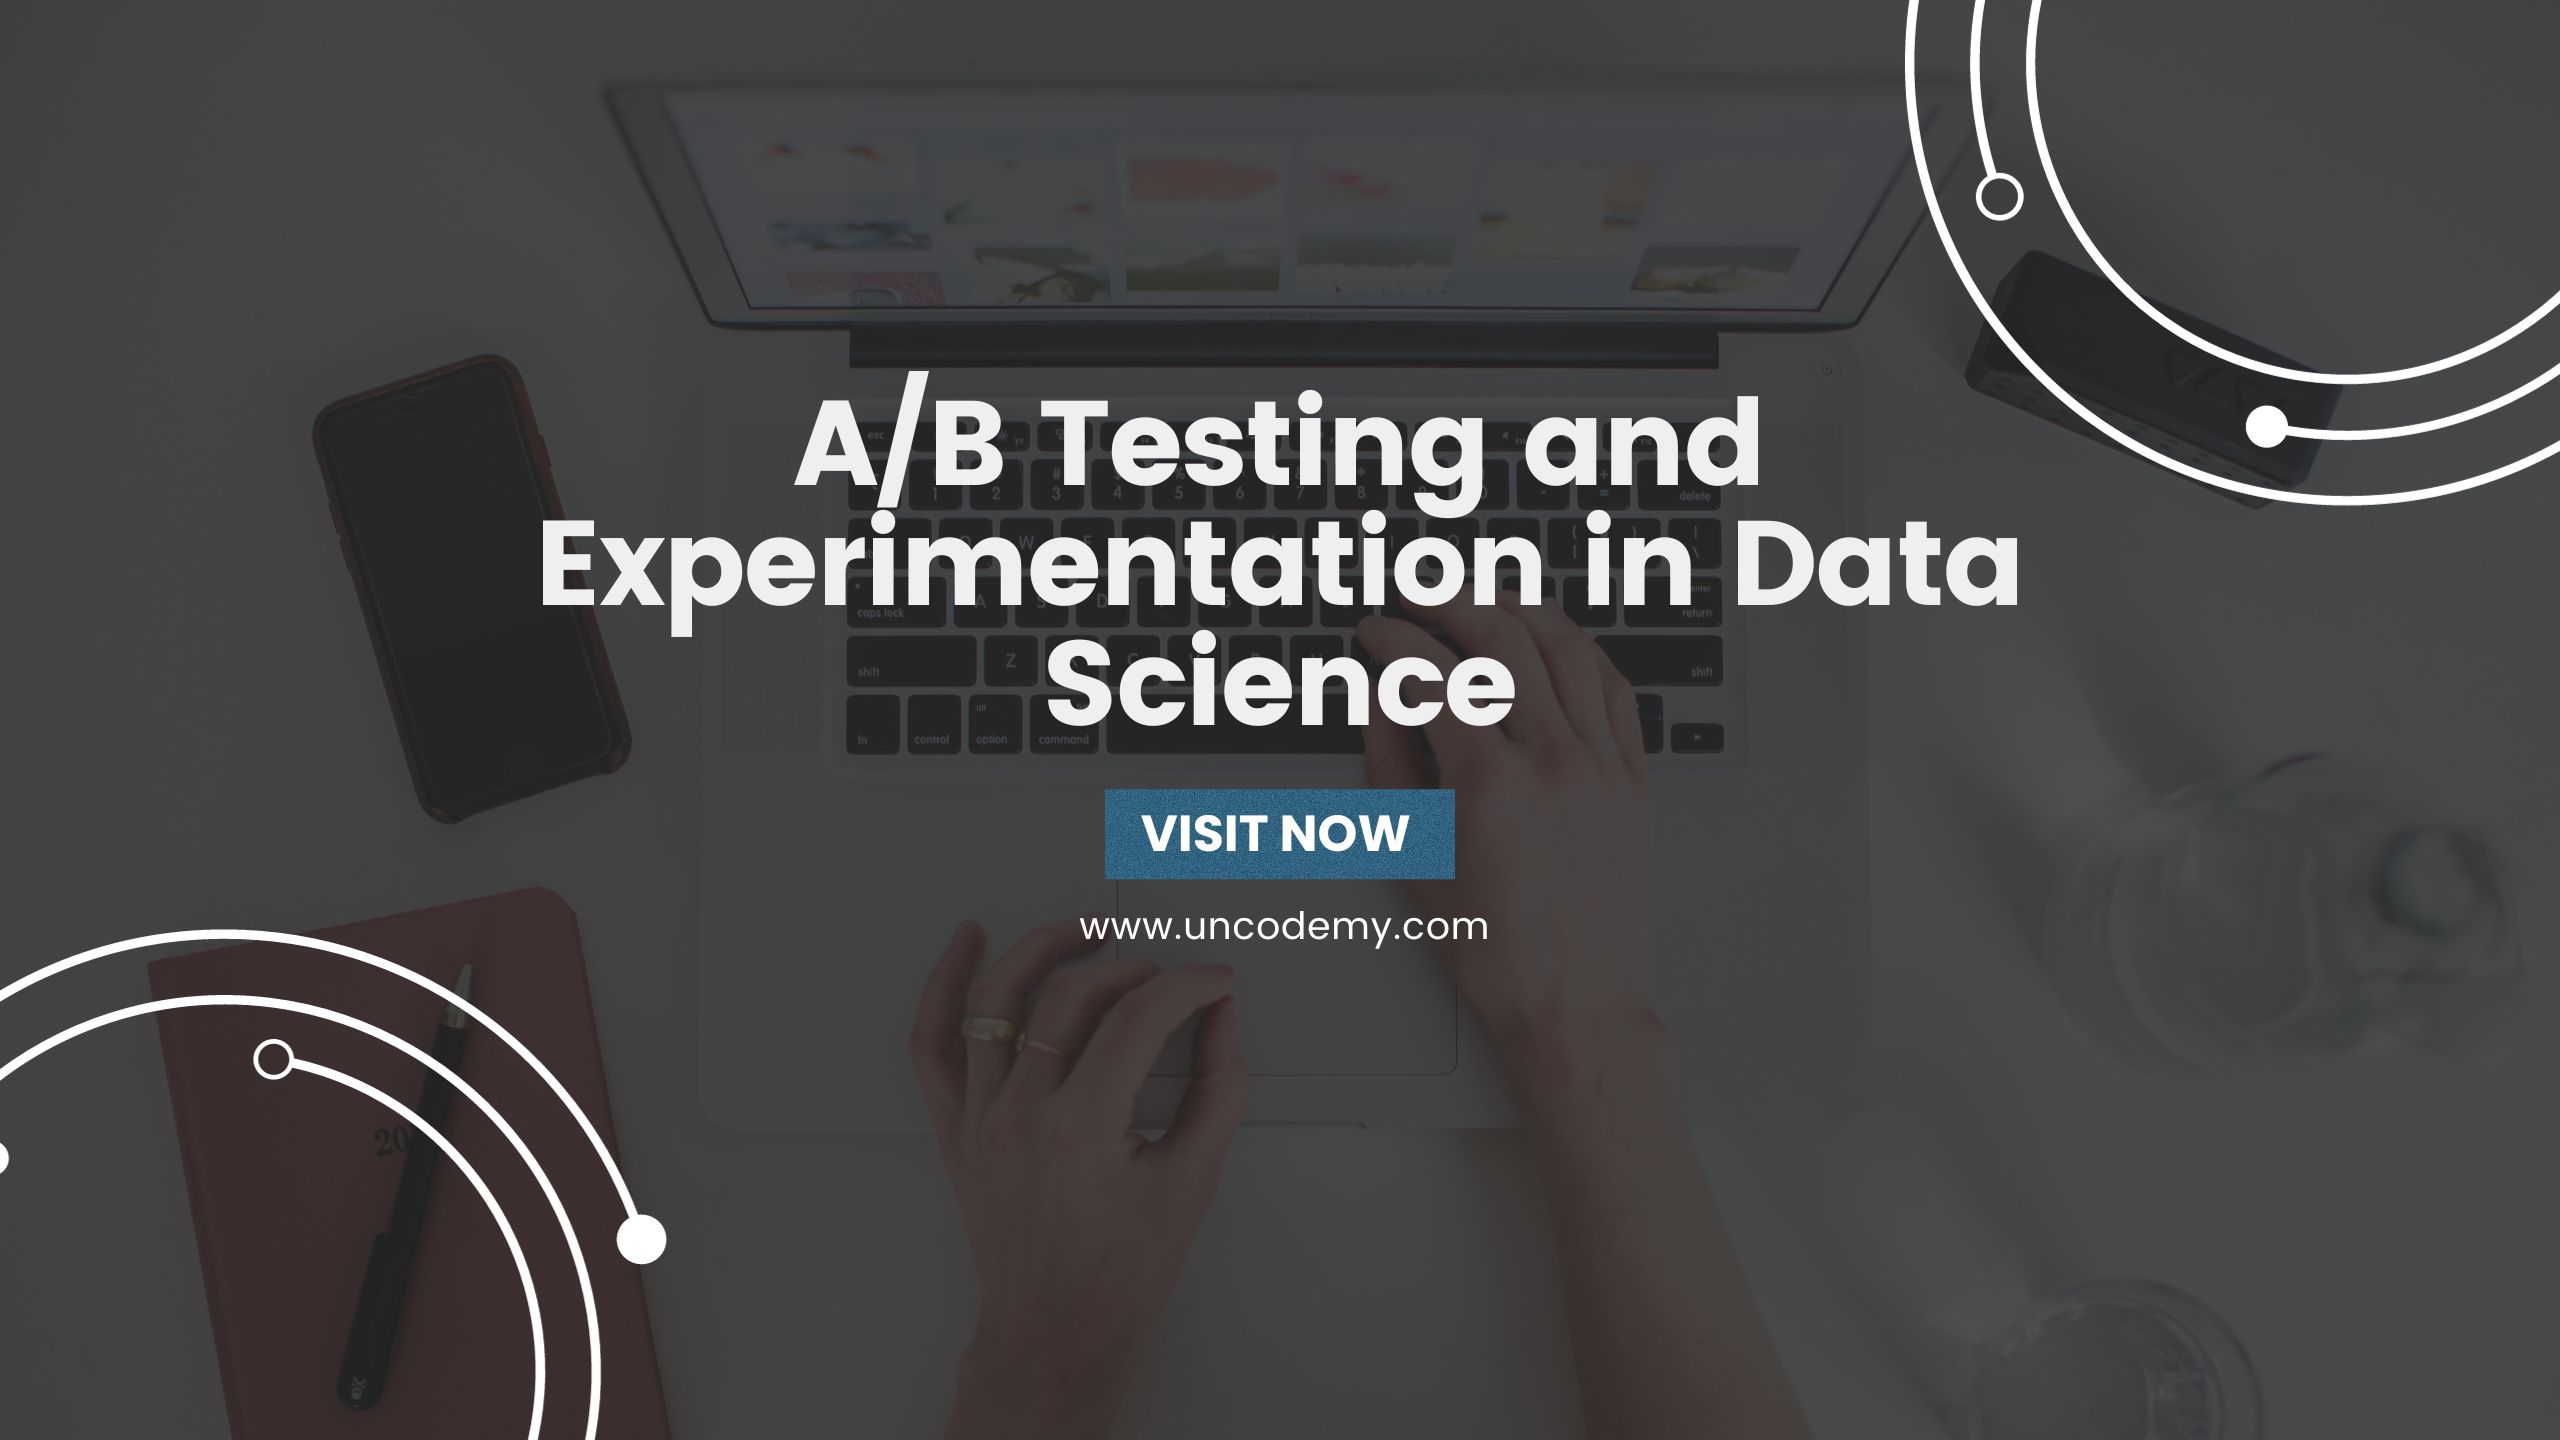 A/B Testing and Experimentation in Data Science